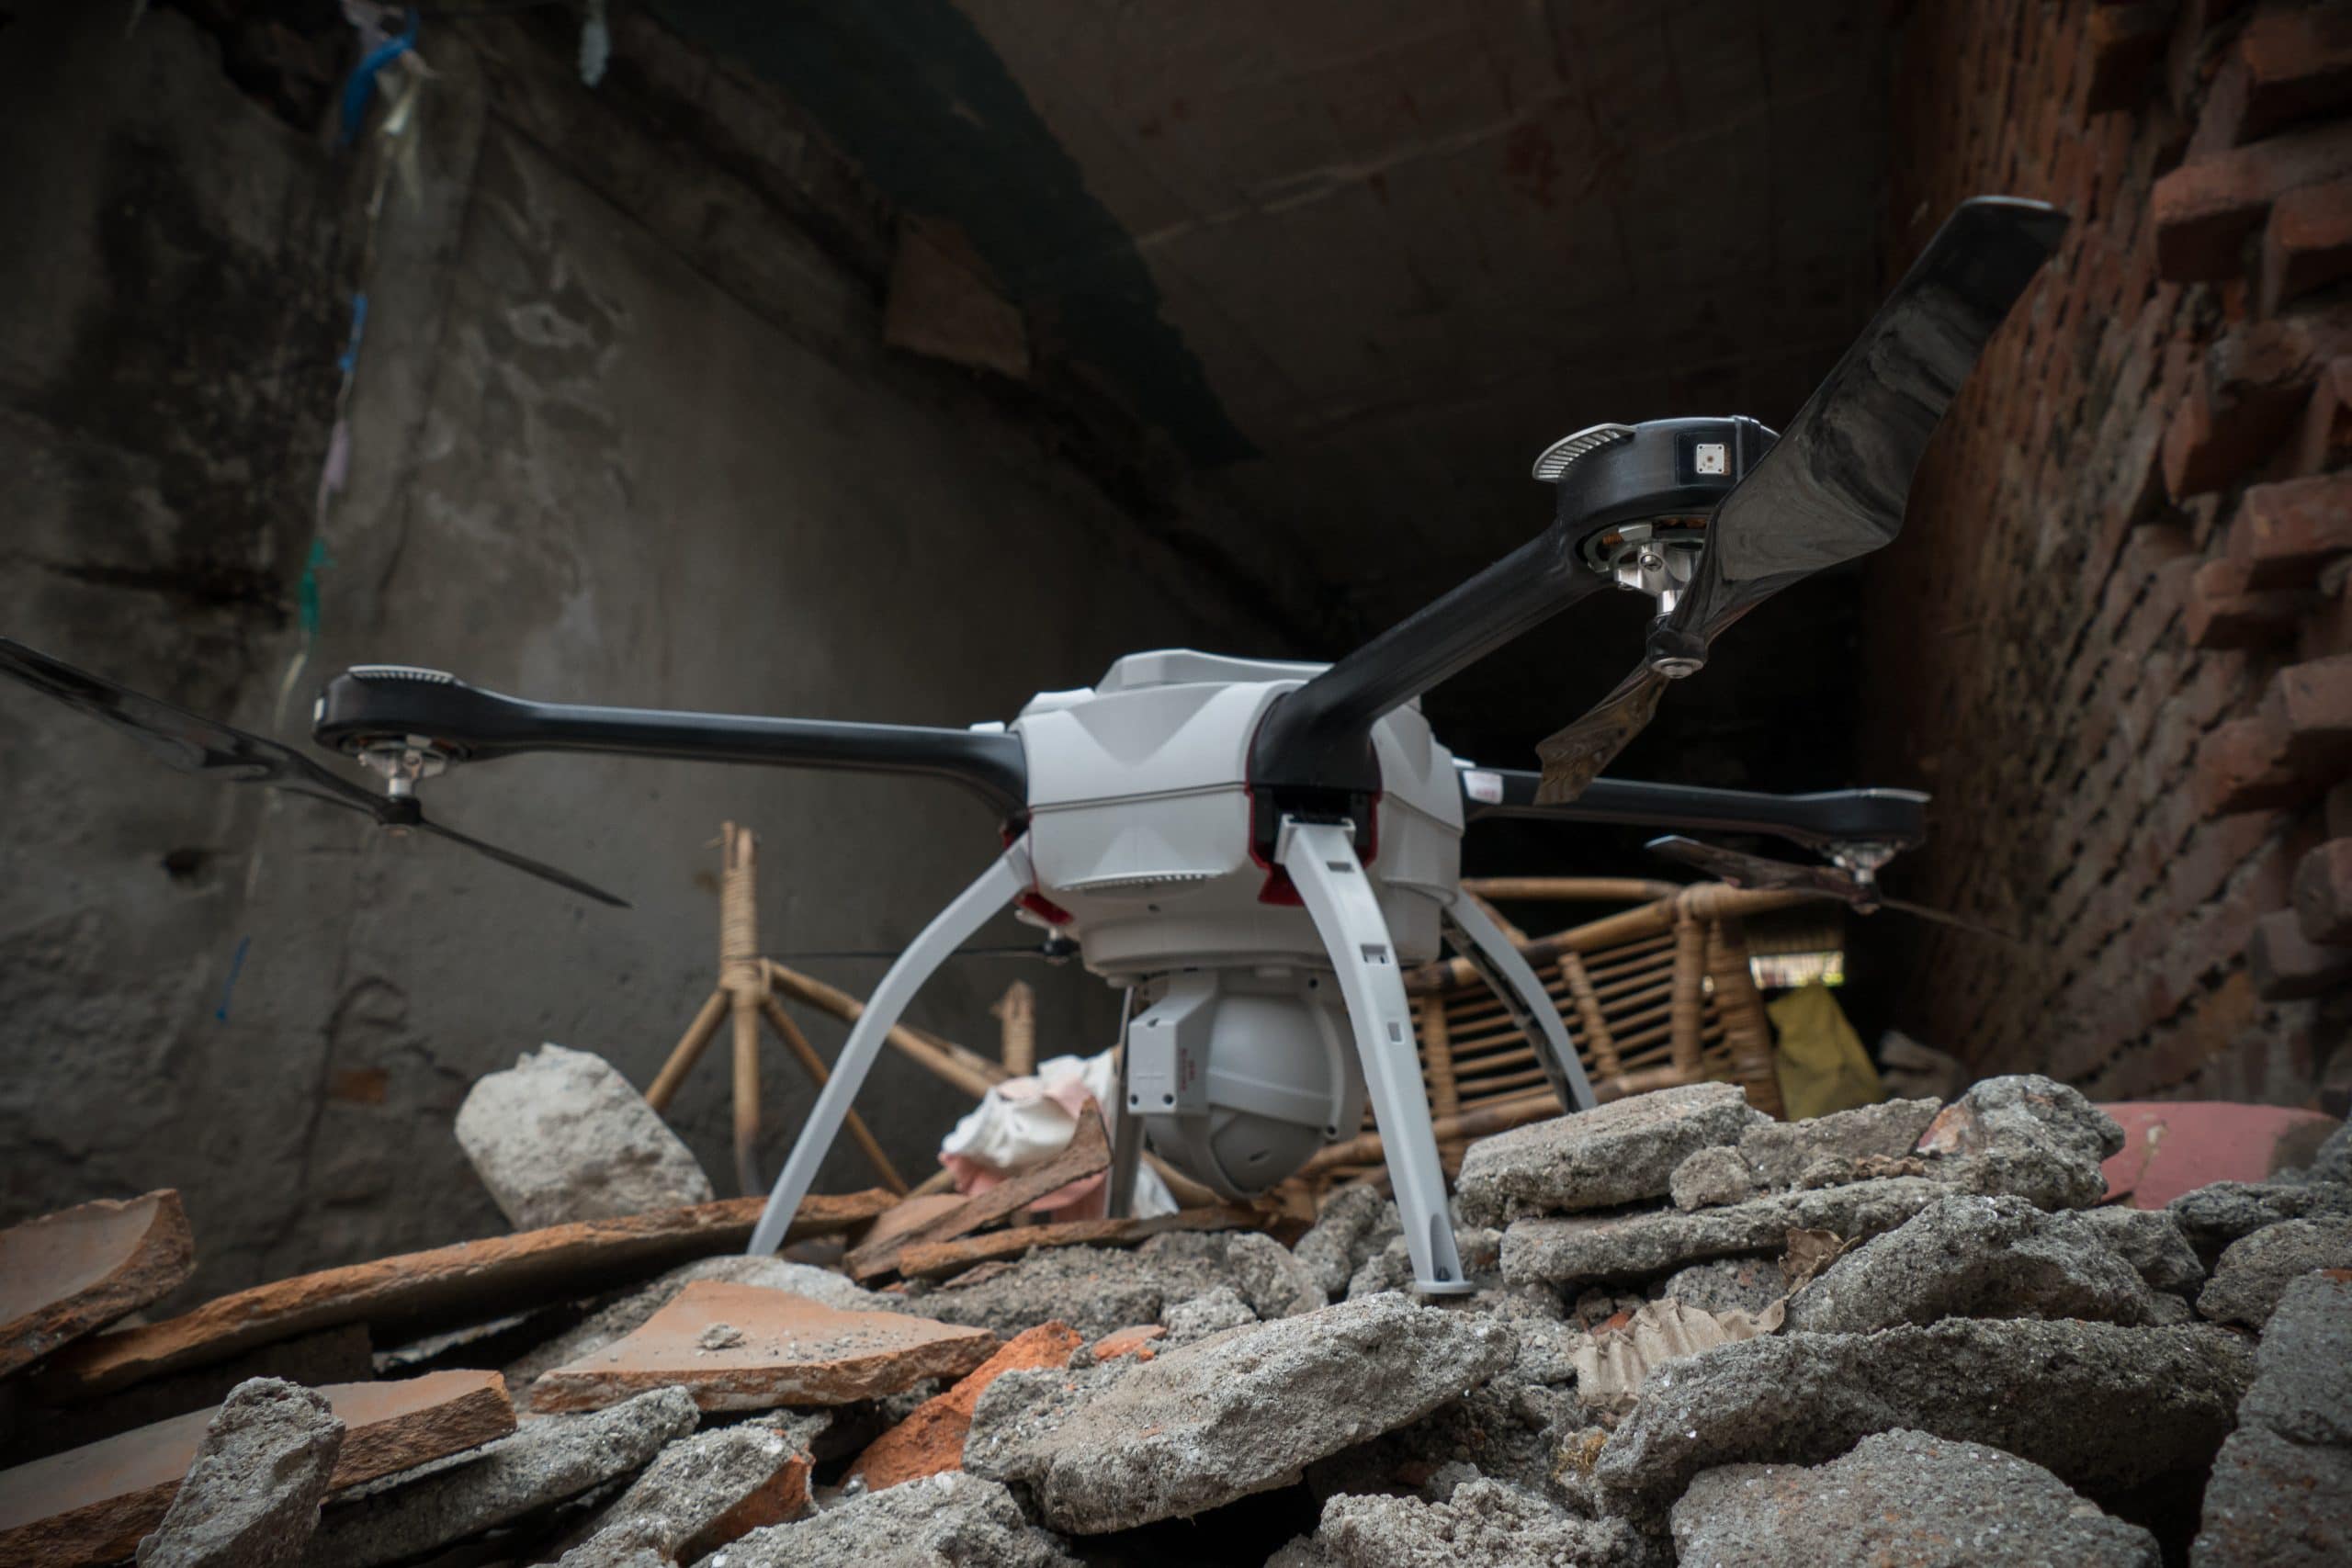 A UAV about to take off from a pile of rubble in Nepal